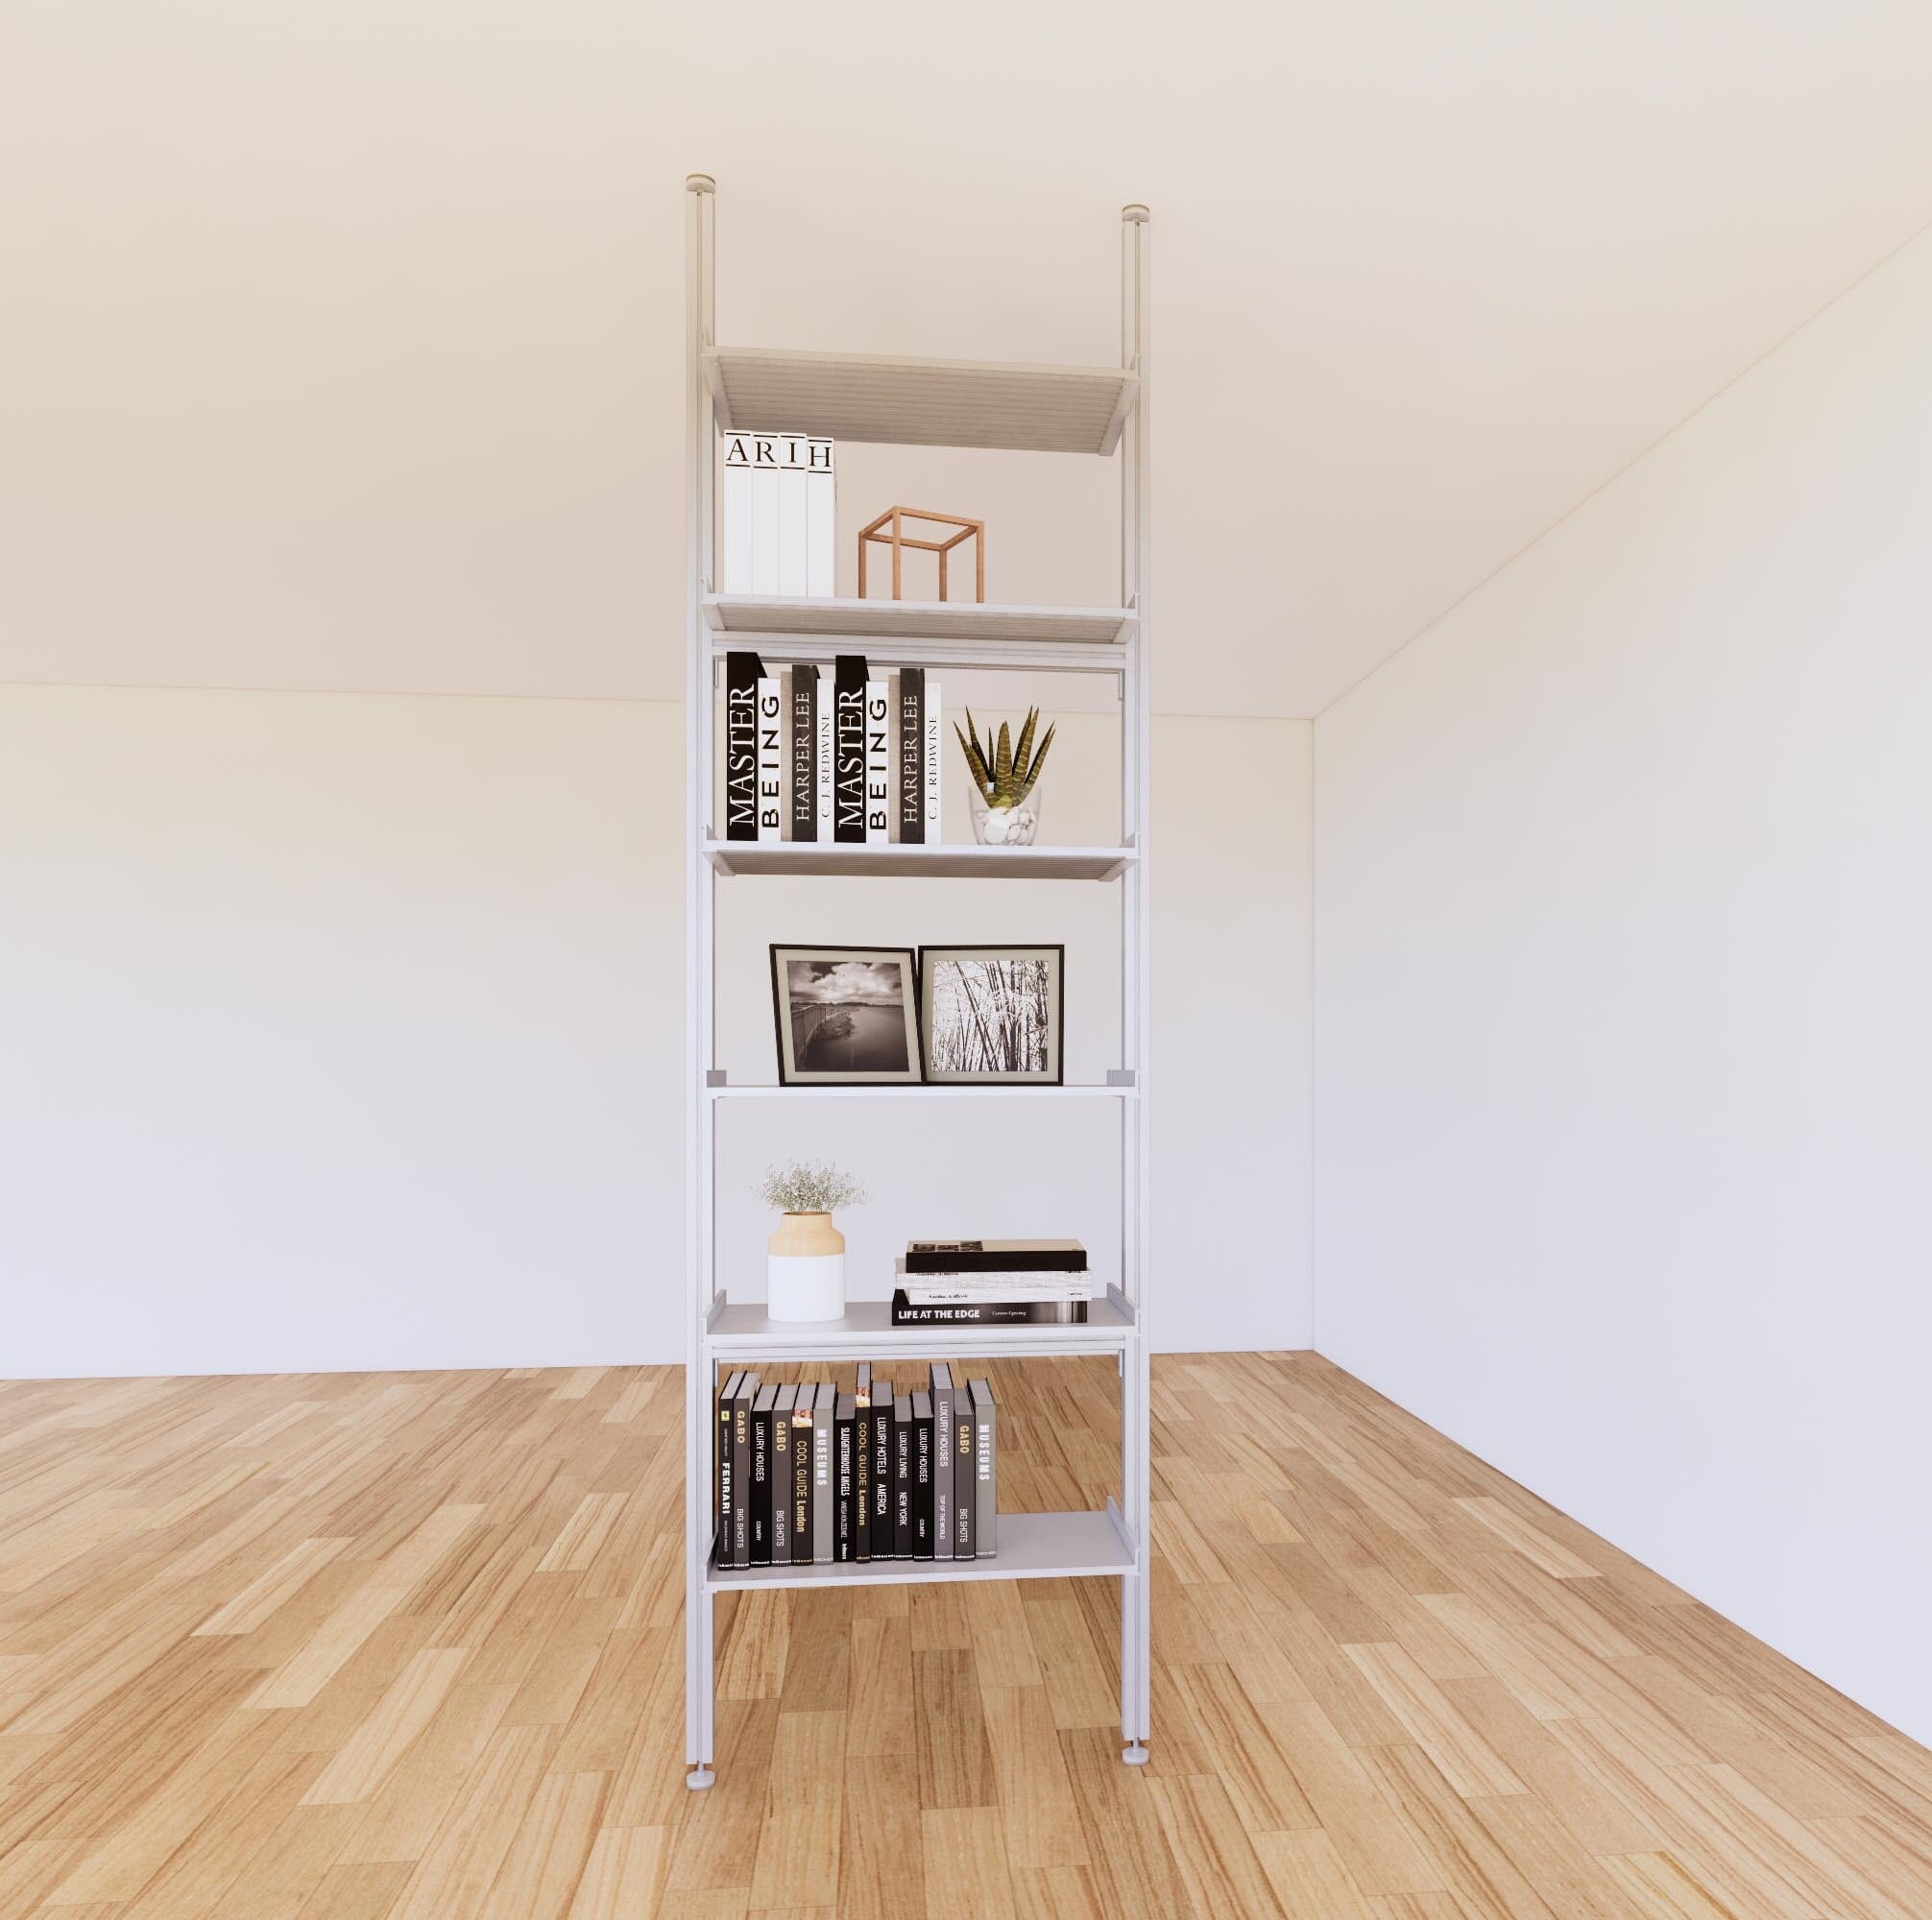 Floor to Ceiling Room Divider Shelving